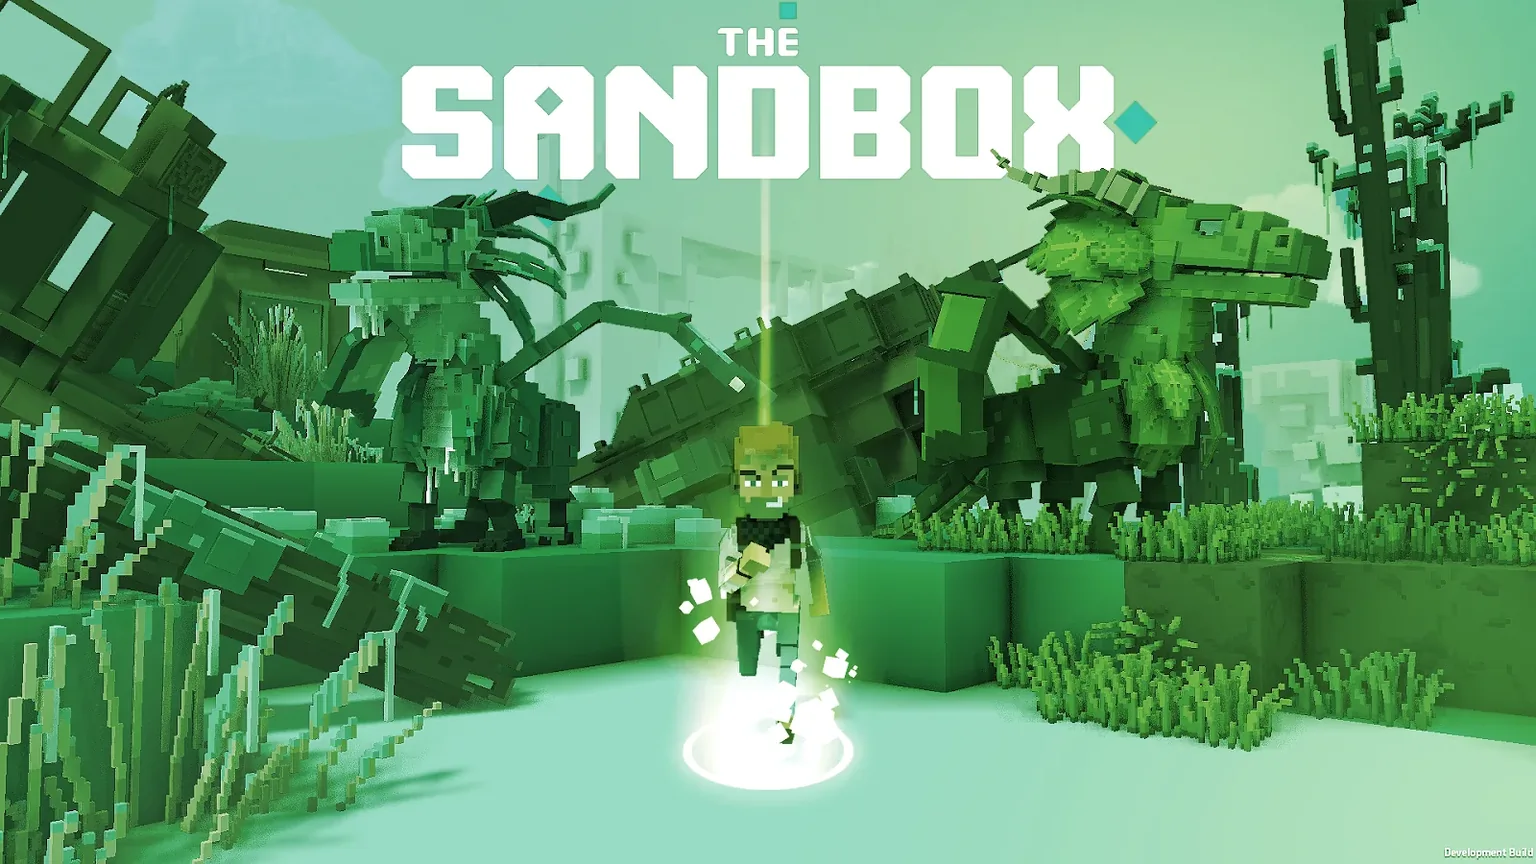 Gaming NFTs are on the rise as the metaverse takes shape. Image: The Sandbox